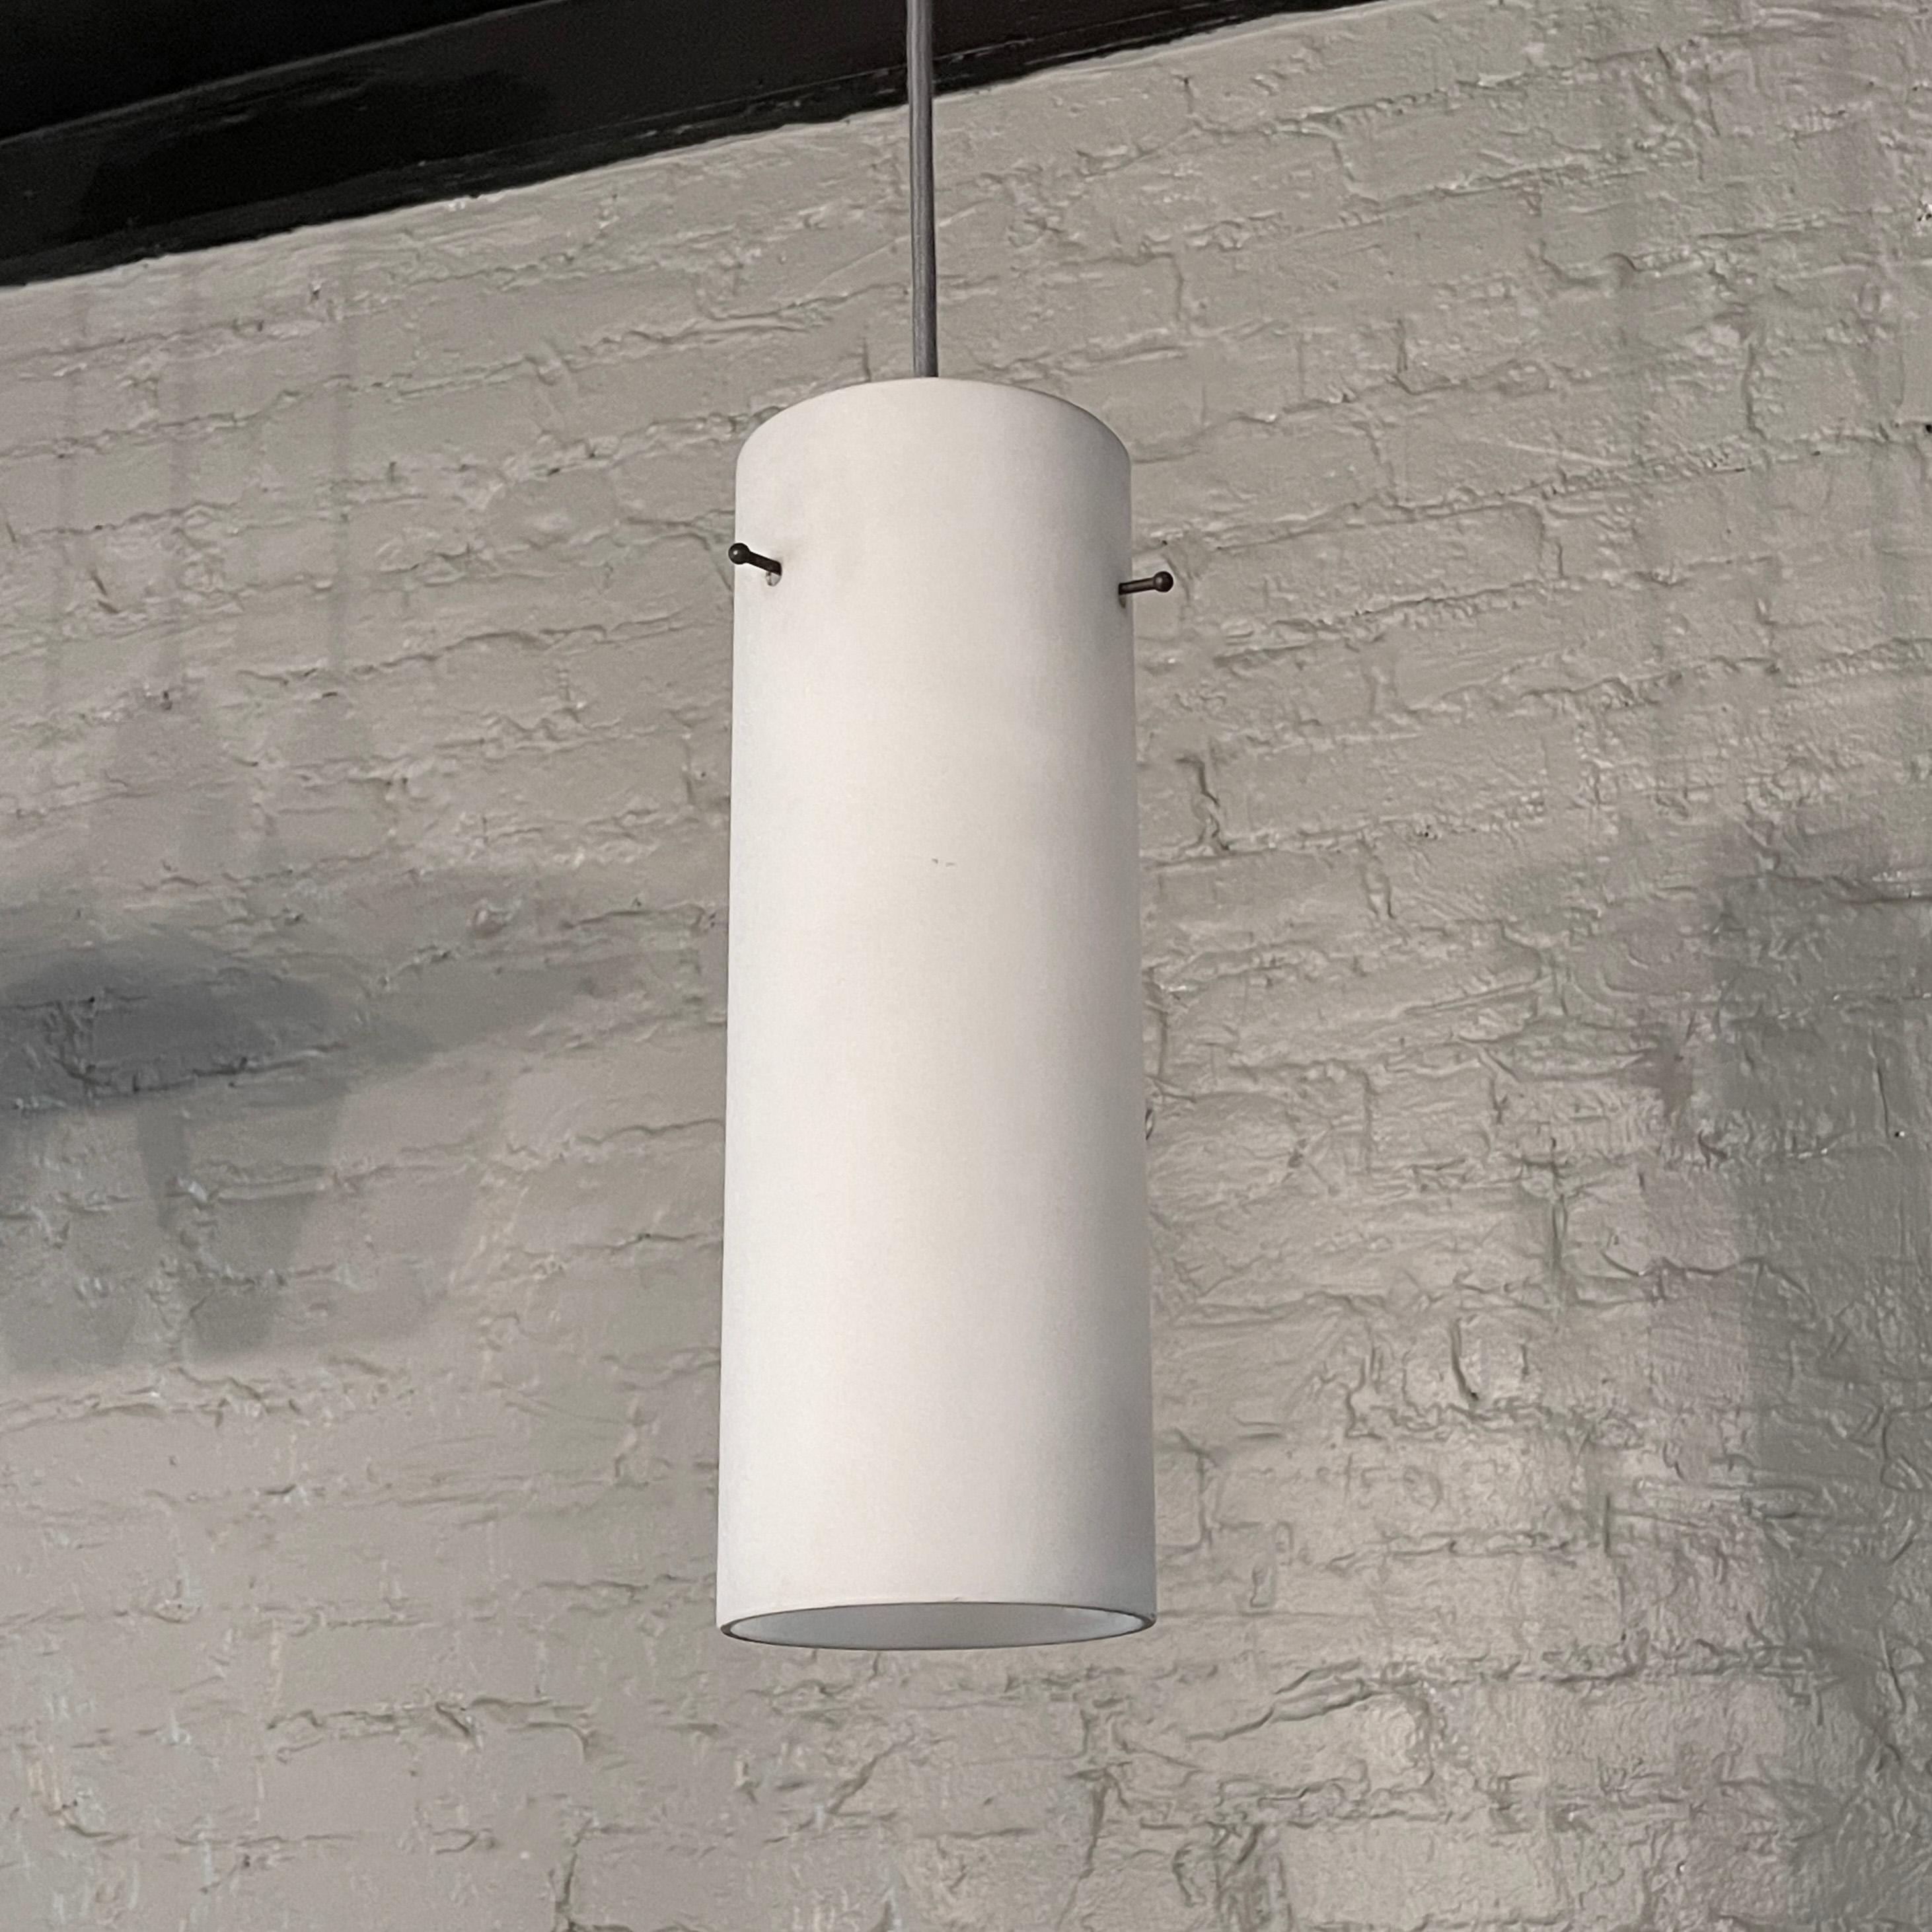 Minimal, Mid-Century Modern, frosted glass cylinder pendant is newly wired with 36